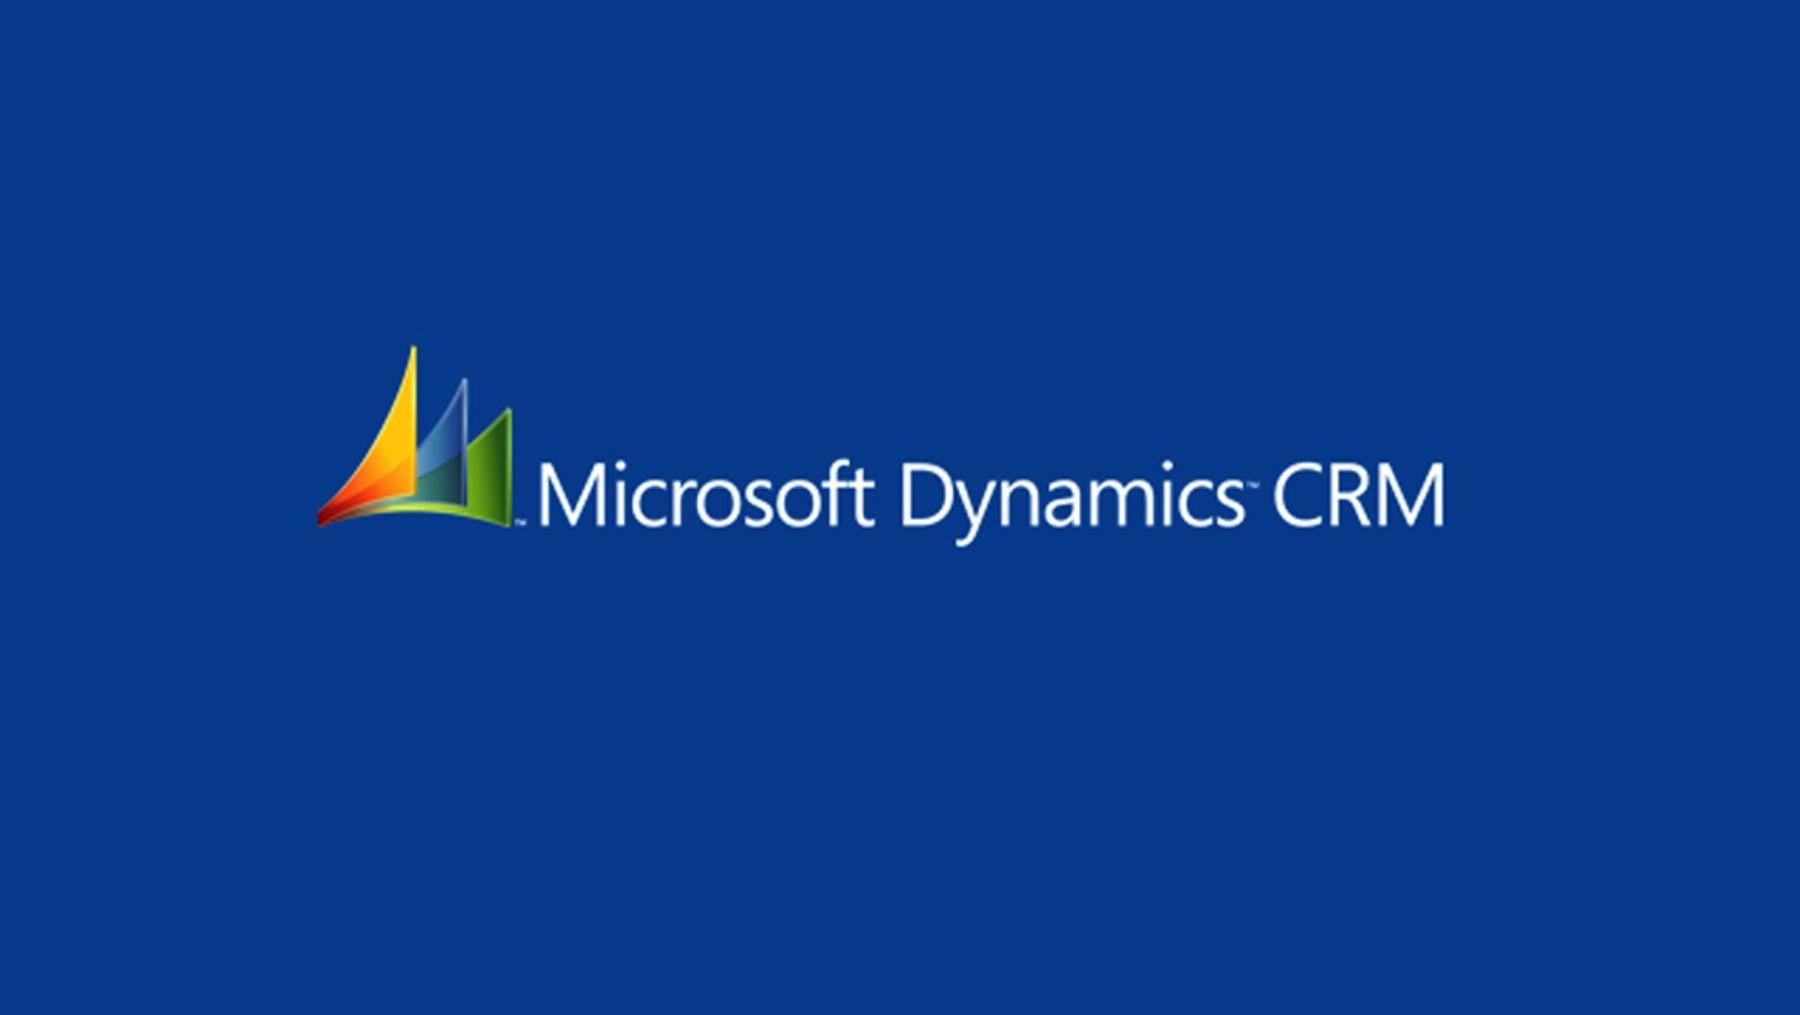 Azure Dynamics CRM Logo - HP To Deploy And Use Microsoft's Dynamics CRM In Six Year Agreement